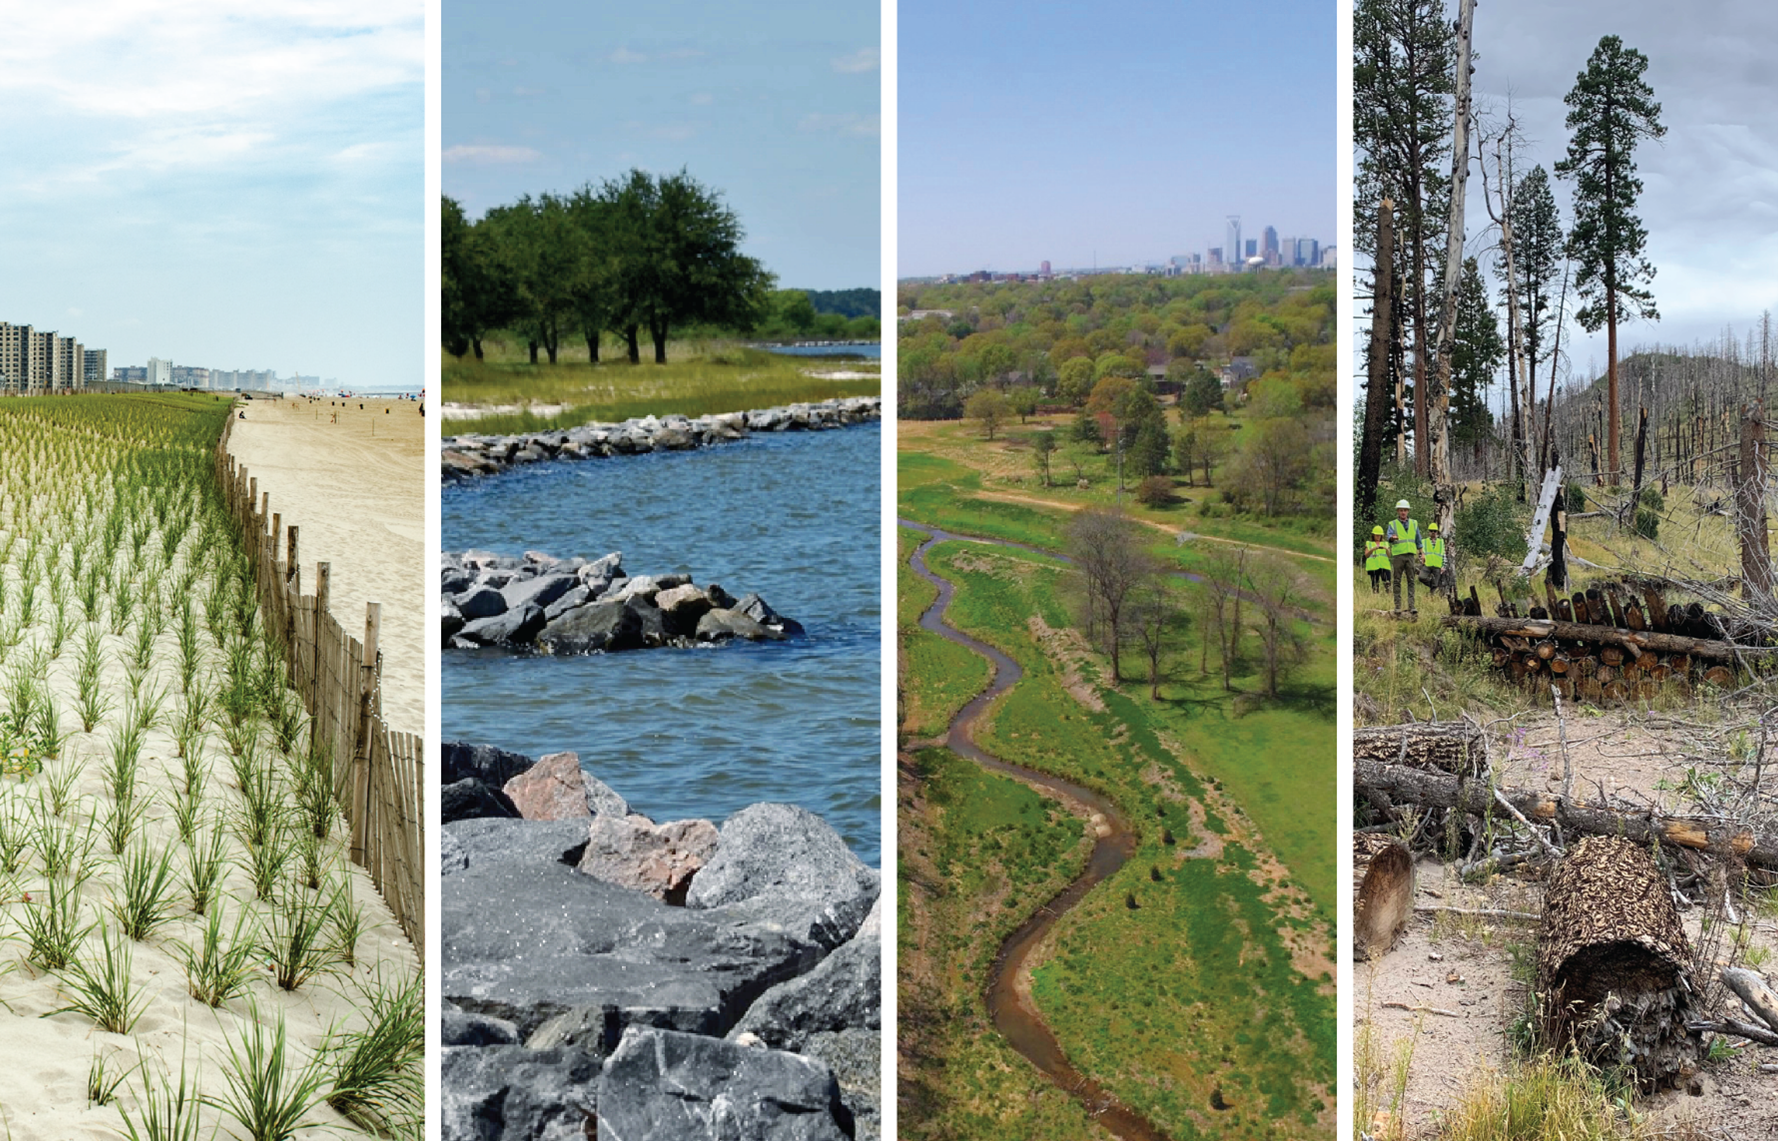   Four landscape images in a single frame: beach seeded with grass, river supported by rock walls, waterway outside a large city, three people in yellow safety vests near burned and downed trees.